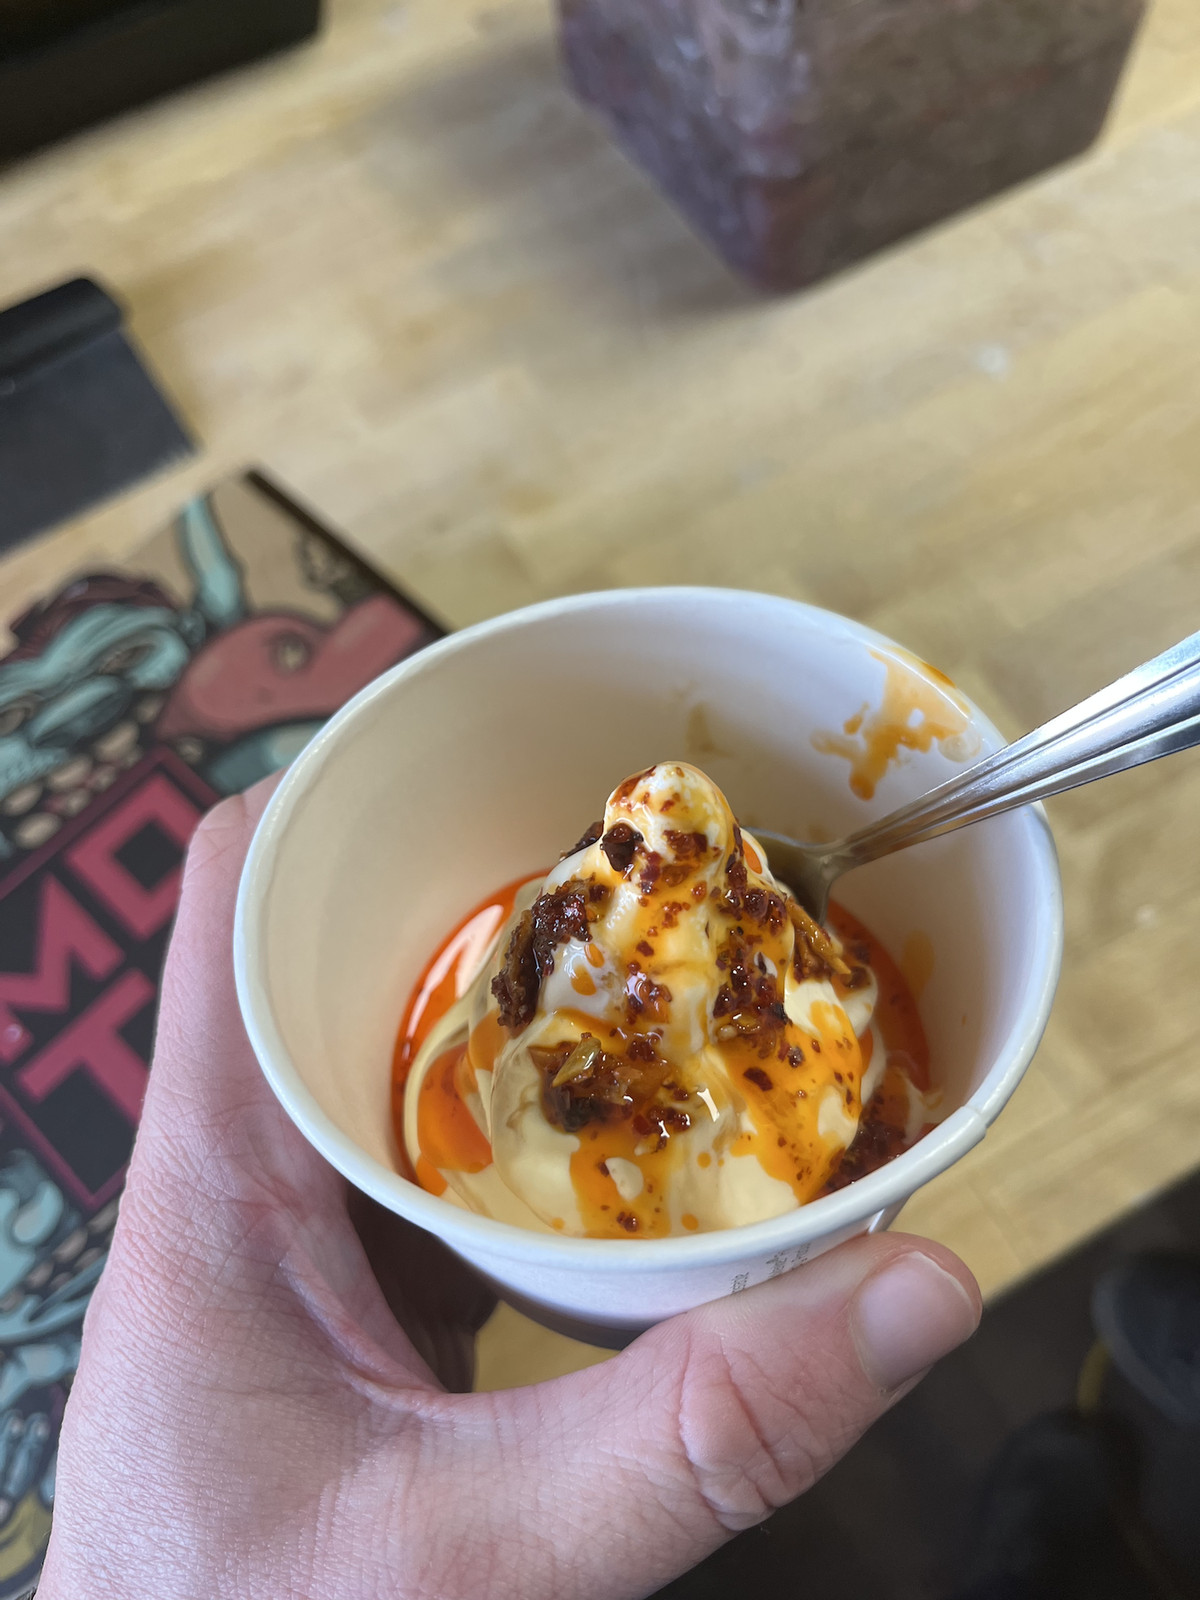 Ice cream topped with chili crisp